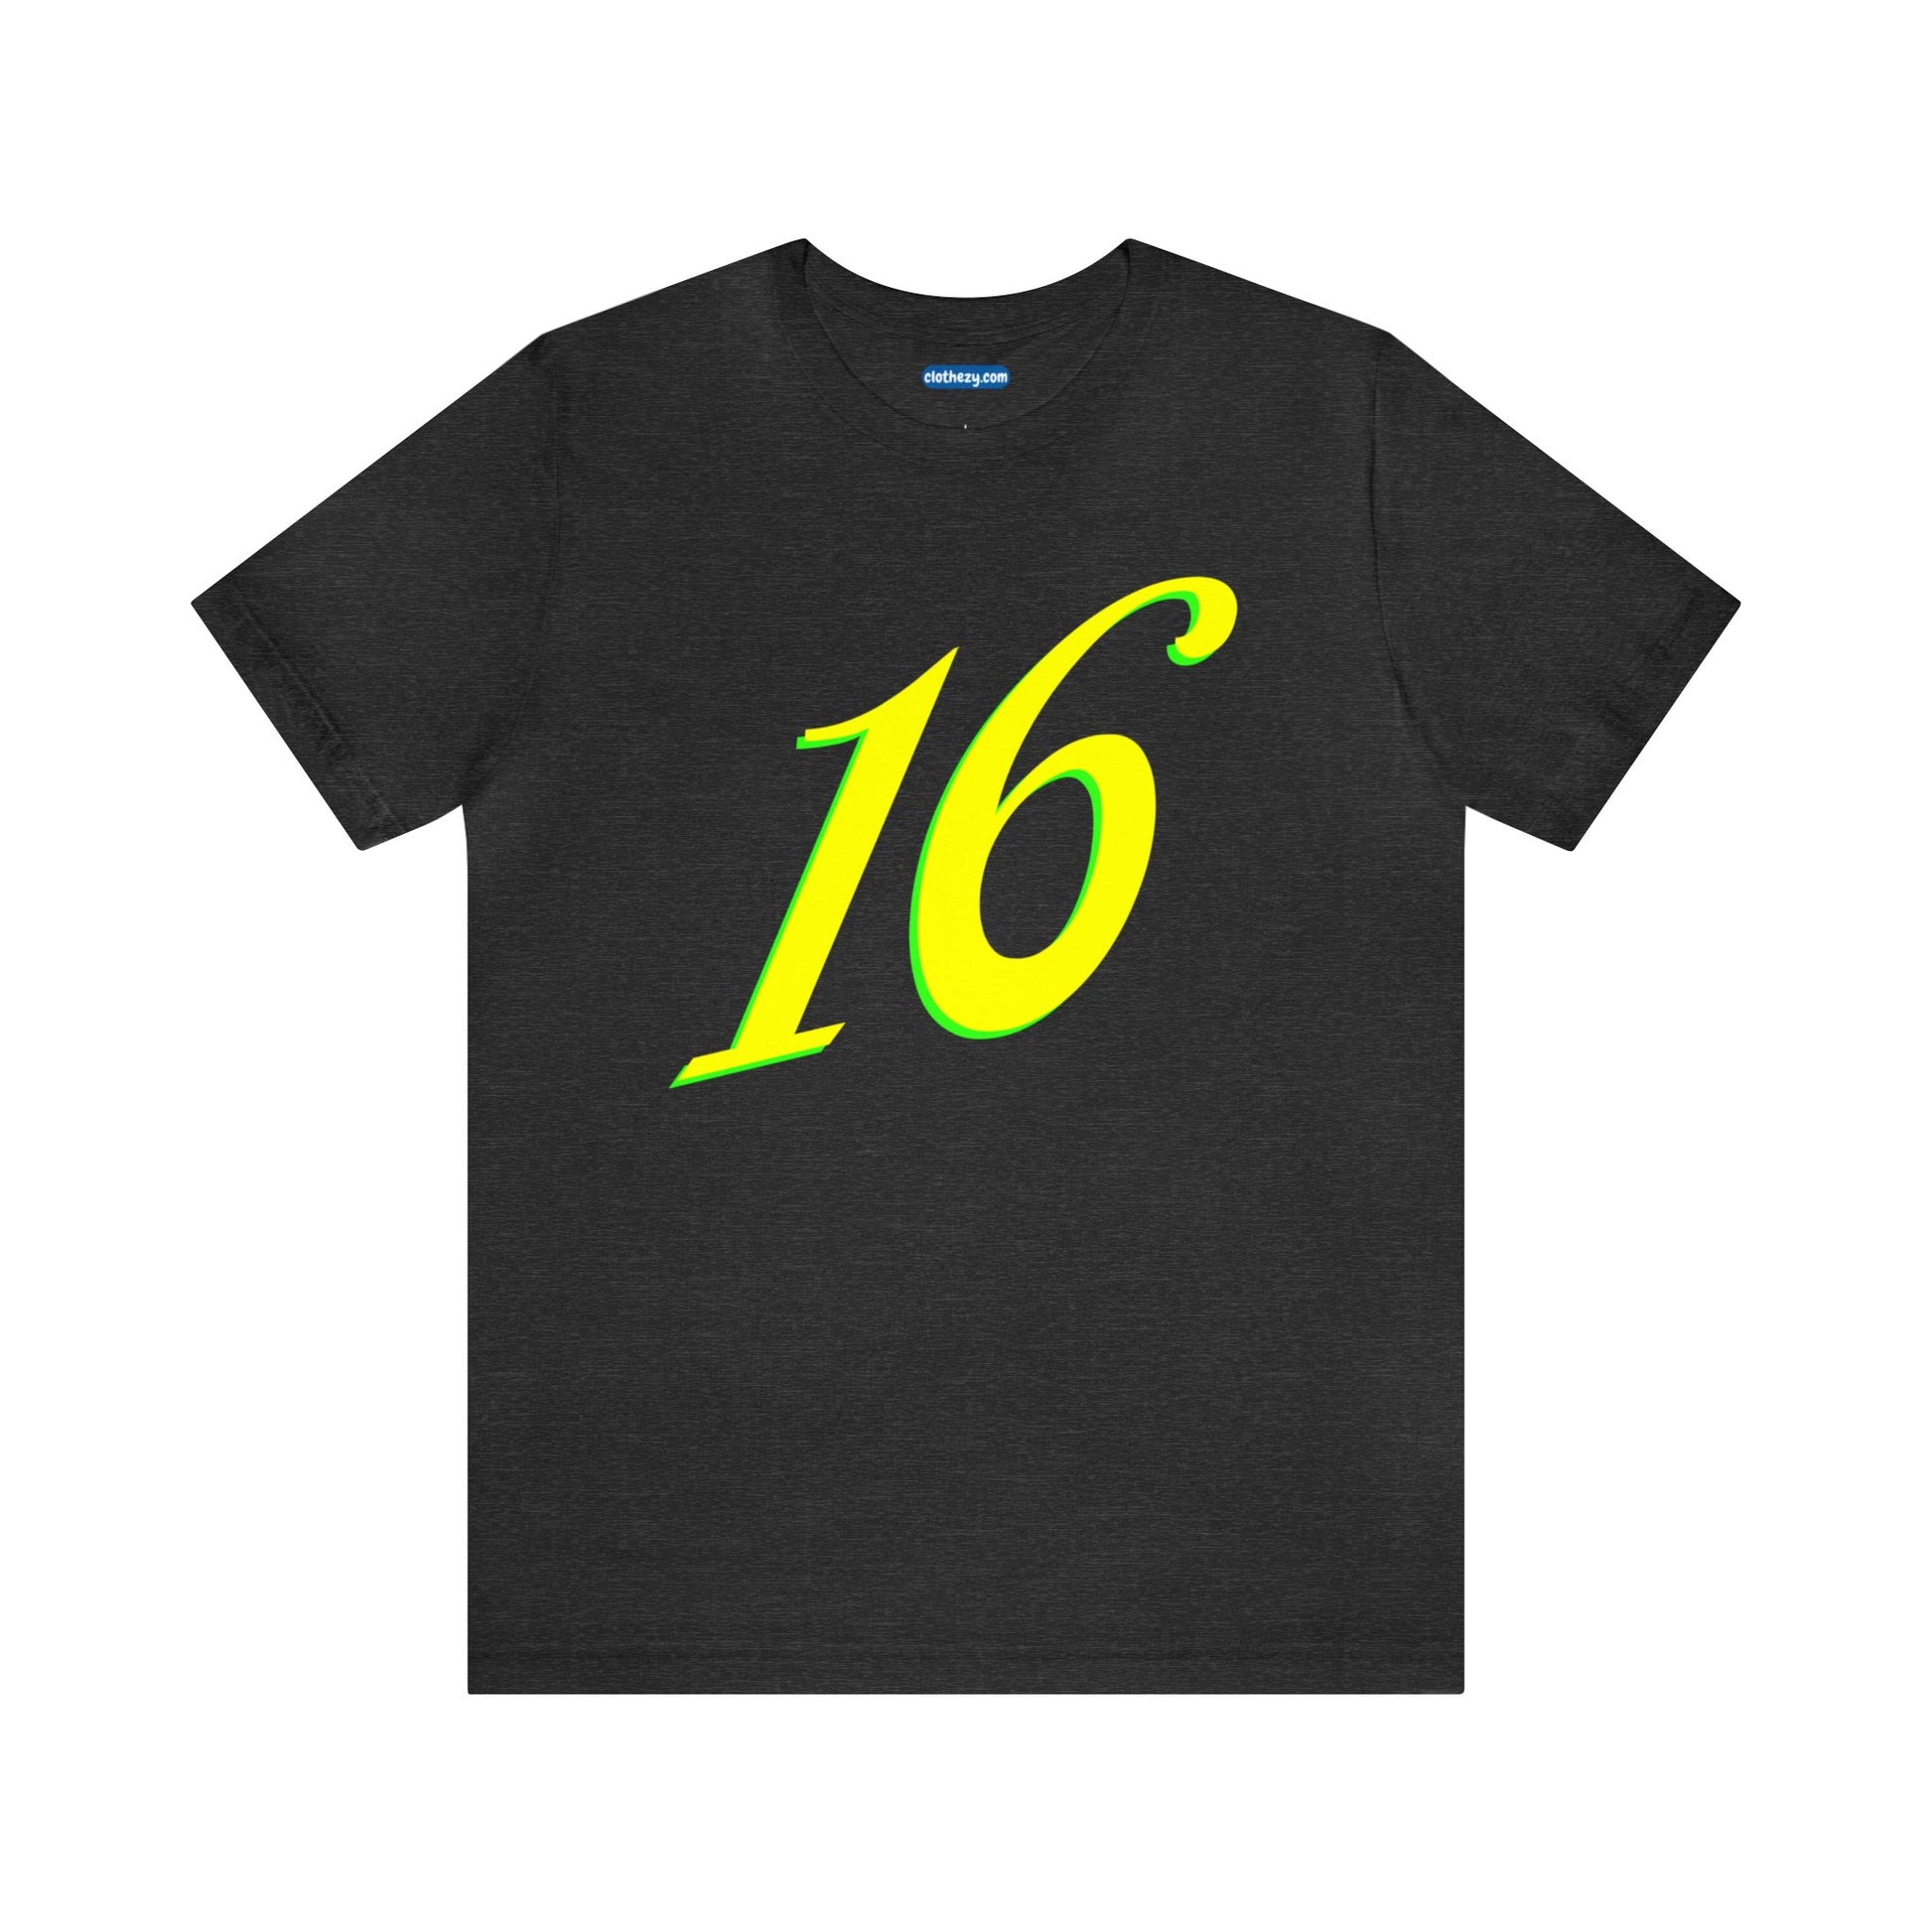 Number 16 Design - Soft Cotton Tee for birthdays and celebrations, Gift for friends and family, Multiple Options by clothezy.com in Gold Size Small - Buy Now